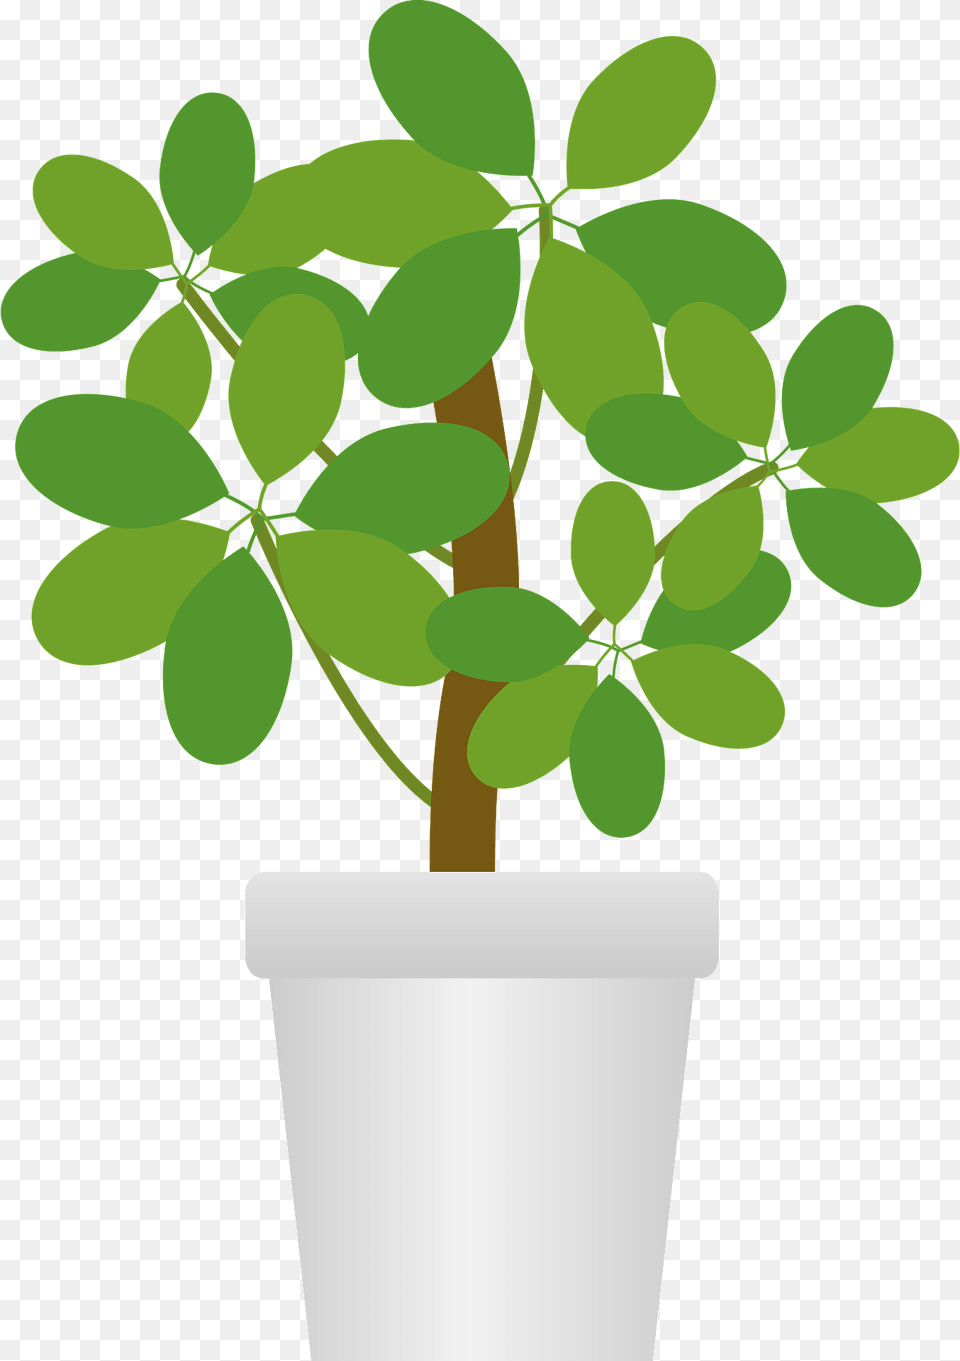 Dwarf Umbrella Tree In A White Pot Clipart, Leaf, Plant, Potted Plant, Jar Png